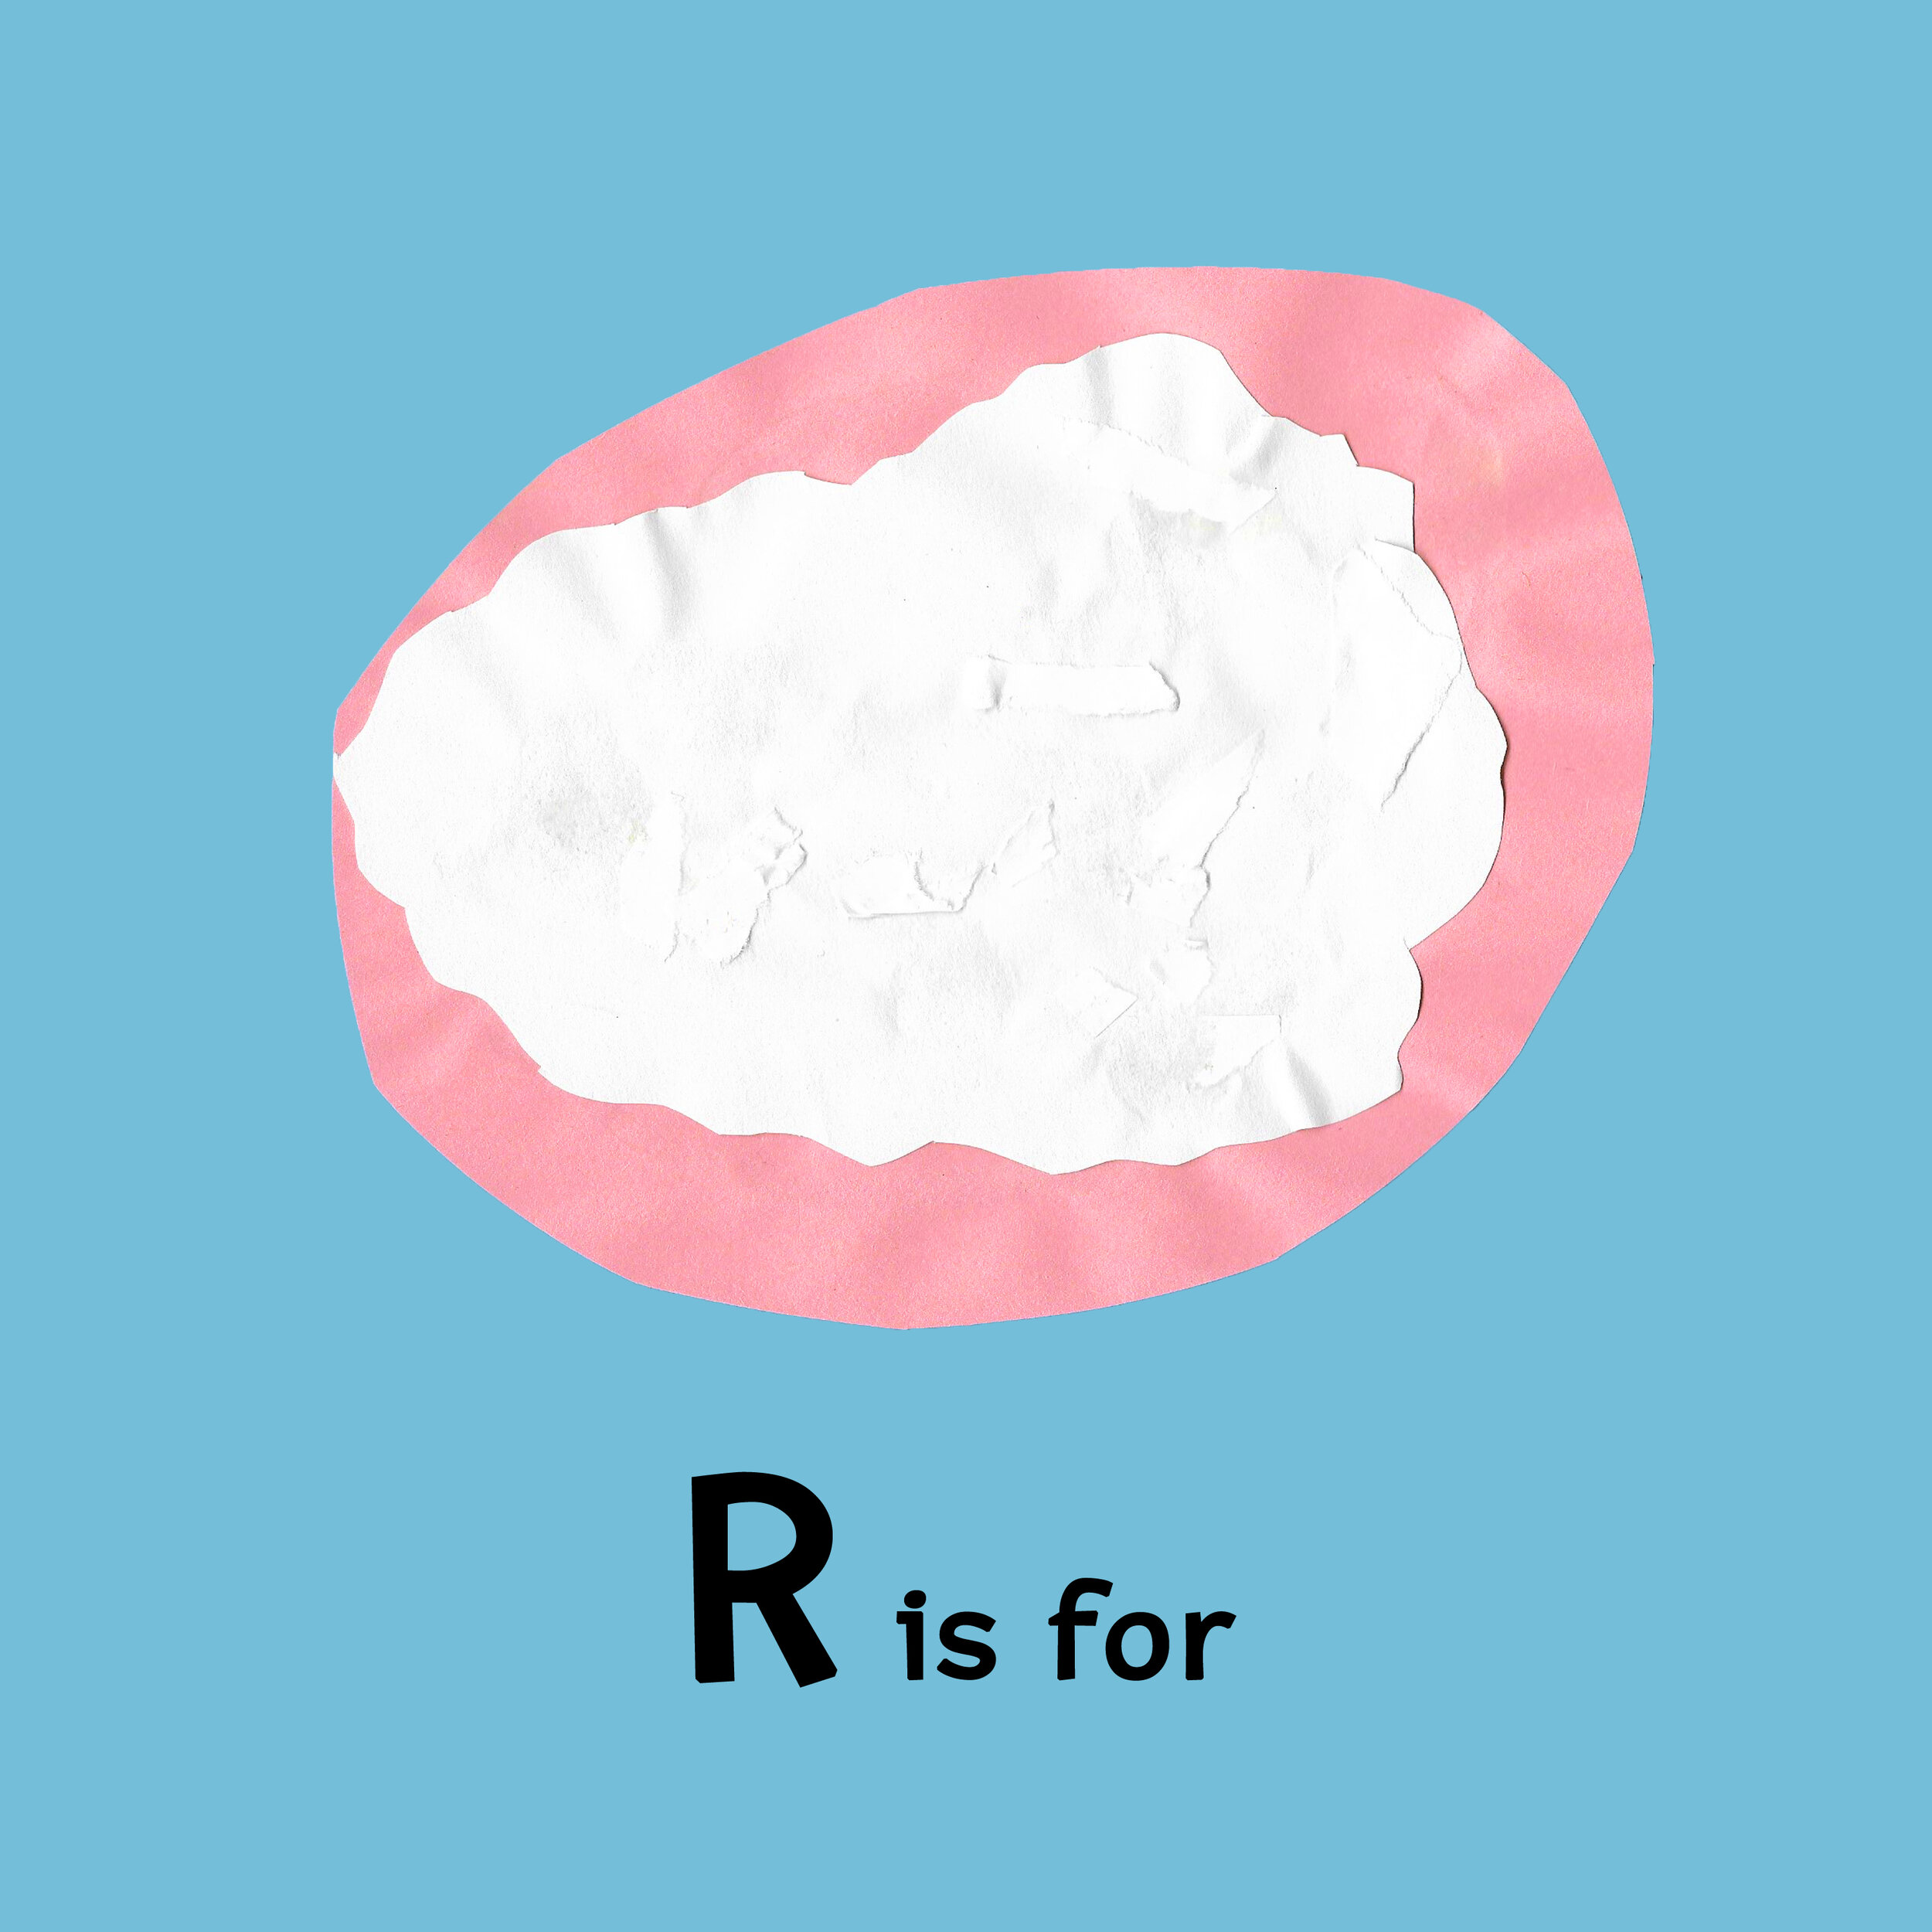 R is for.jpg